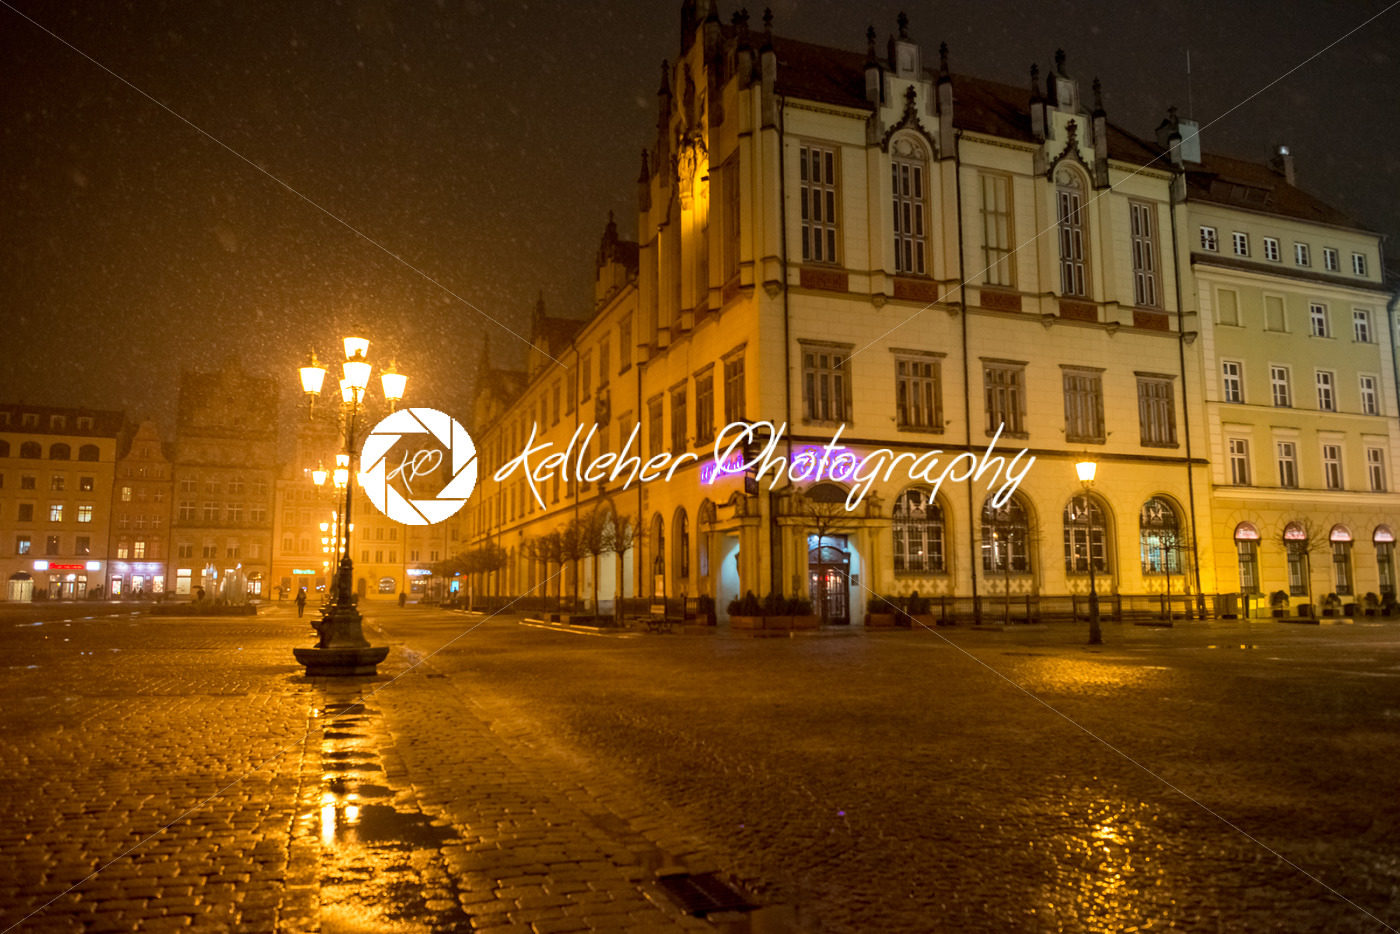 Wroclaw, Poland – March 6, 2018: Wroclaw Market Square at night in historic capital of Silesia, Poland, Europe. - Kelleher Photography Store